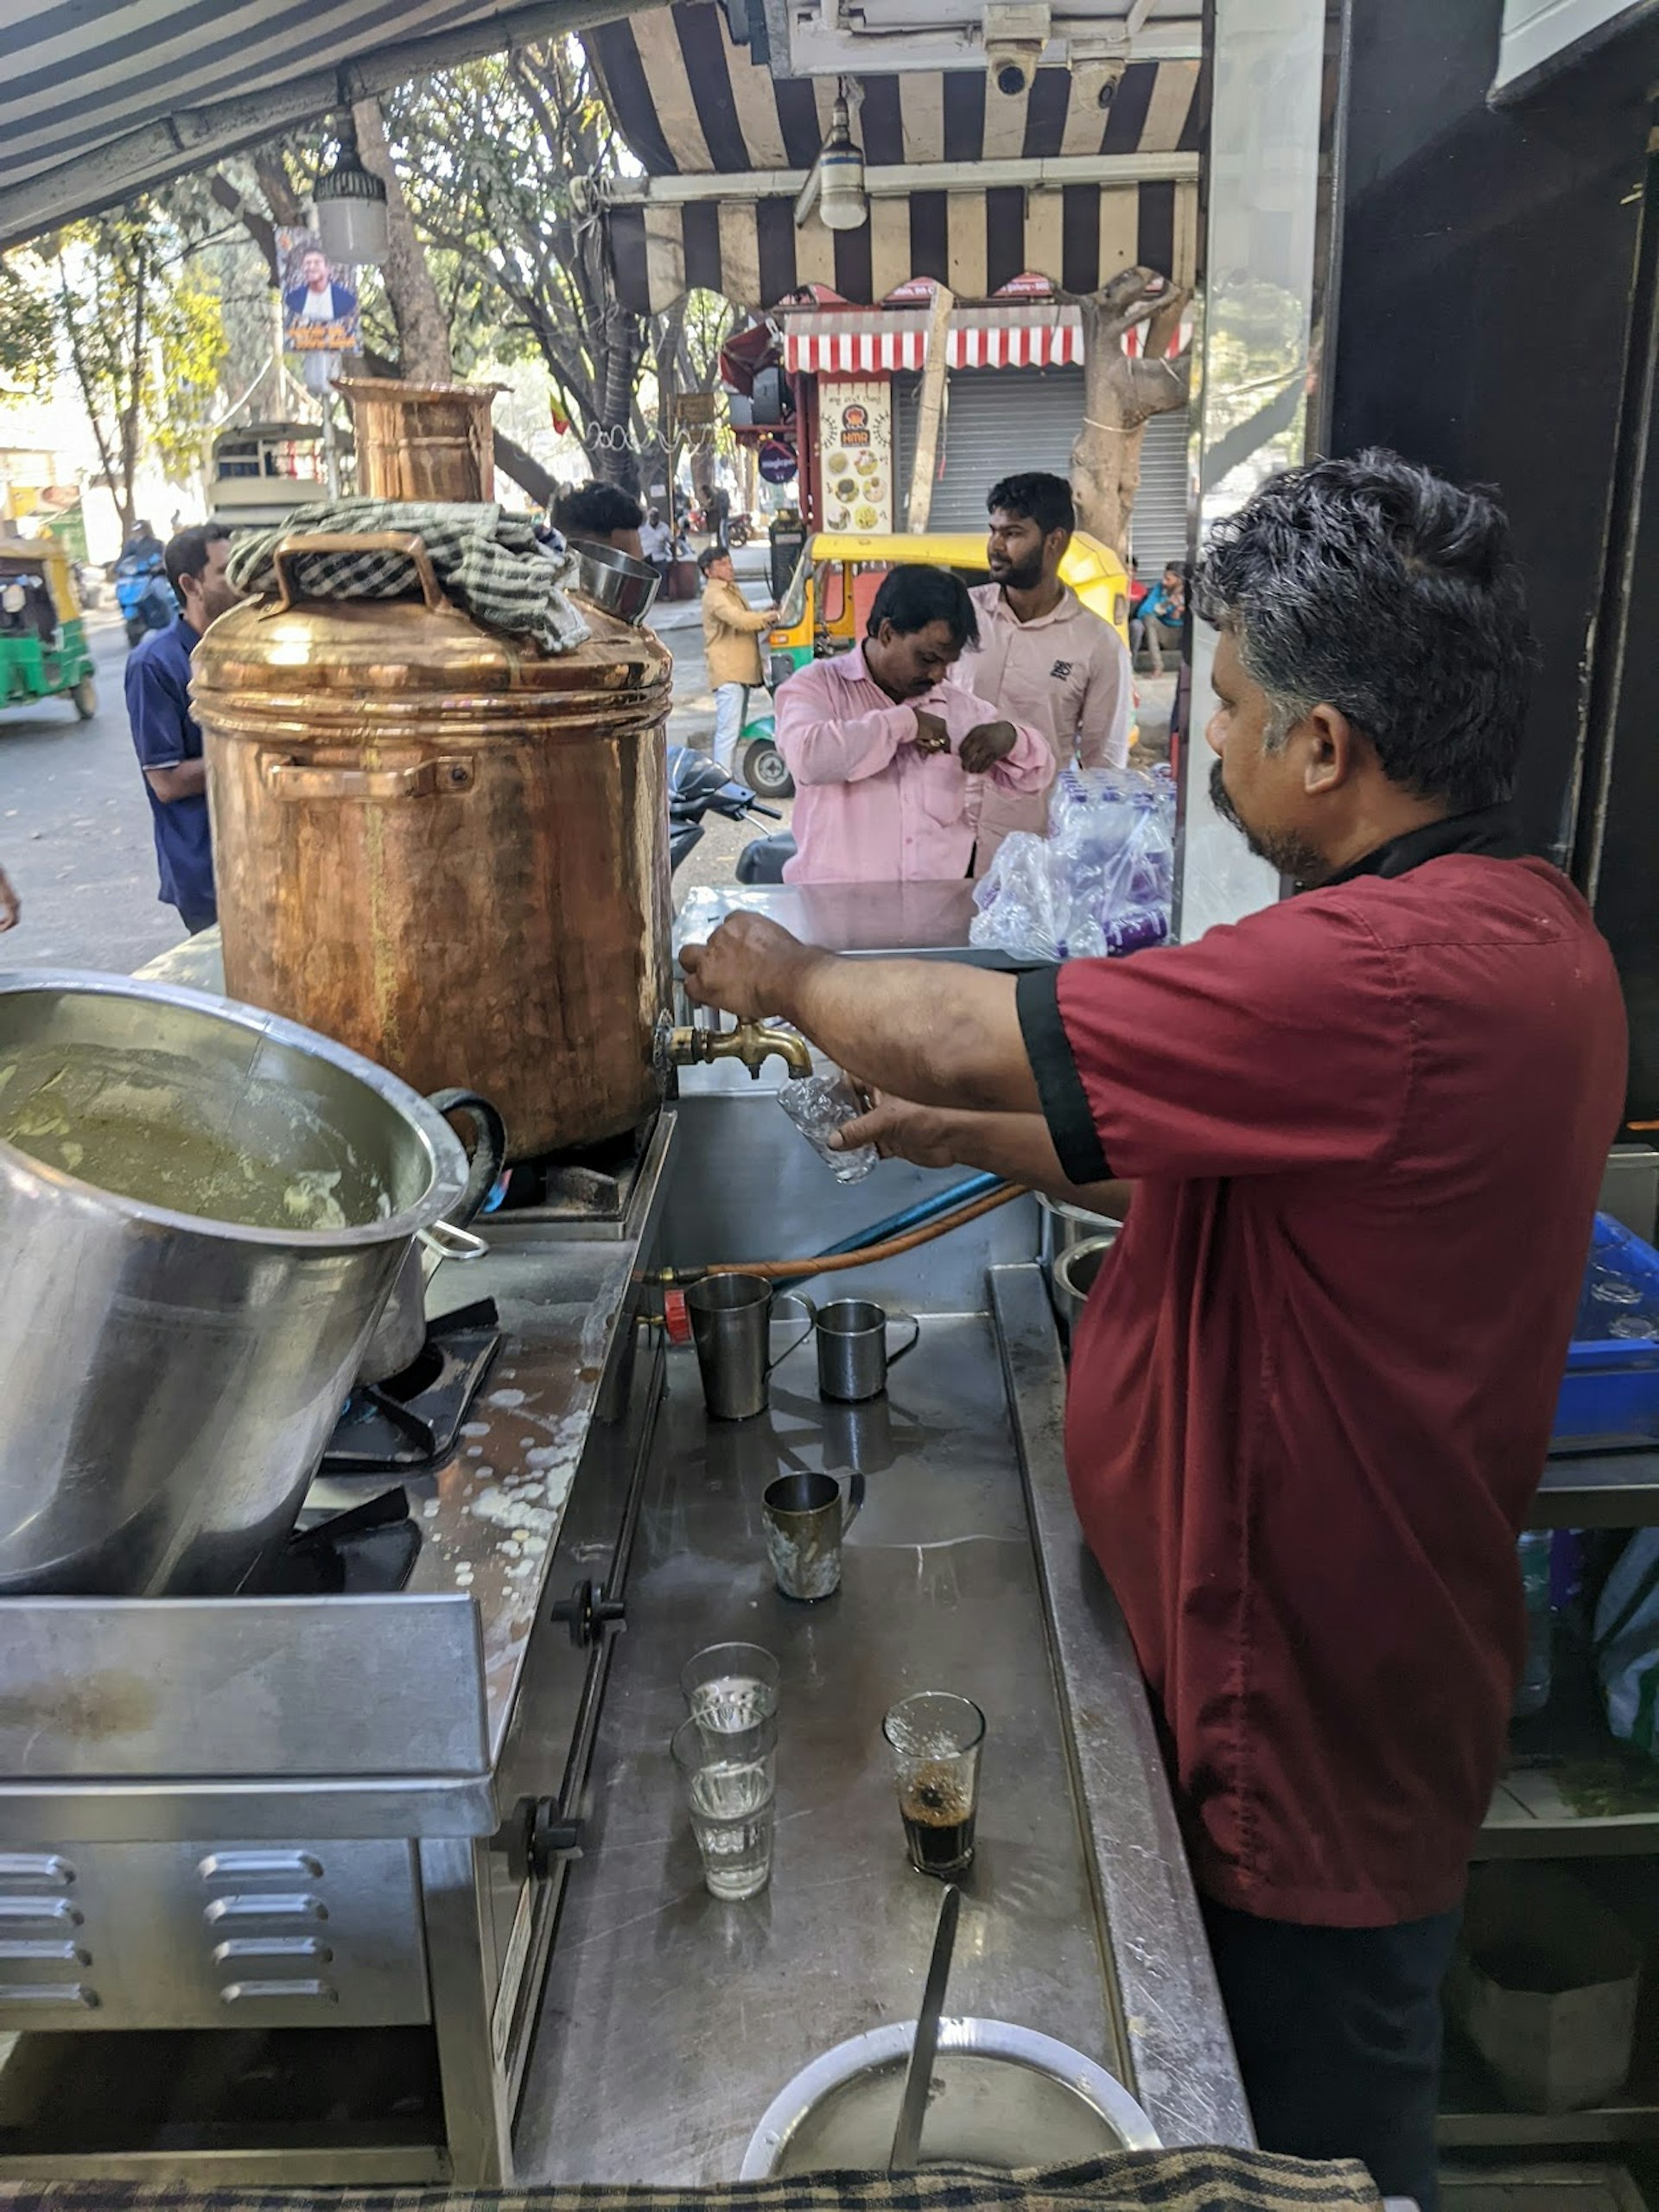 A man prepares coffee at a large urn out on the street